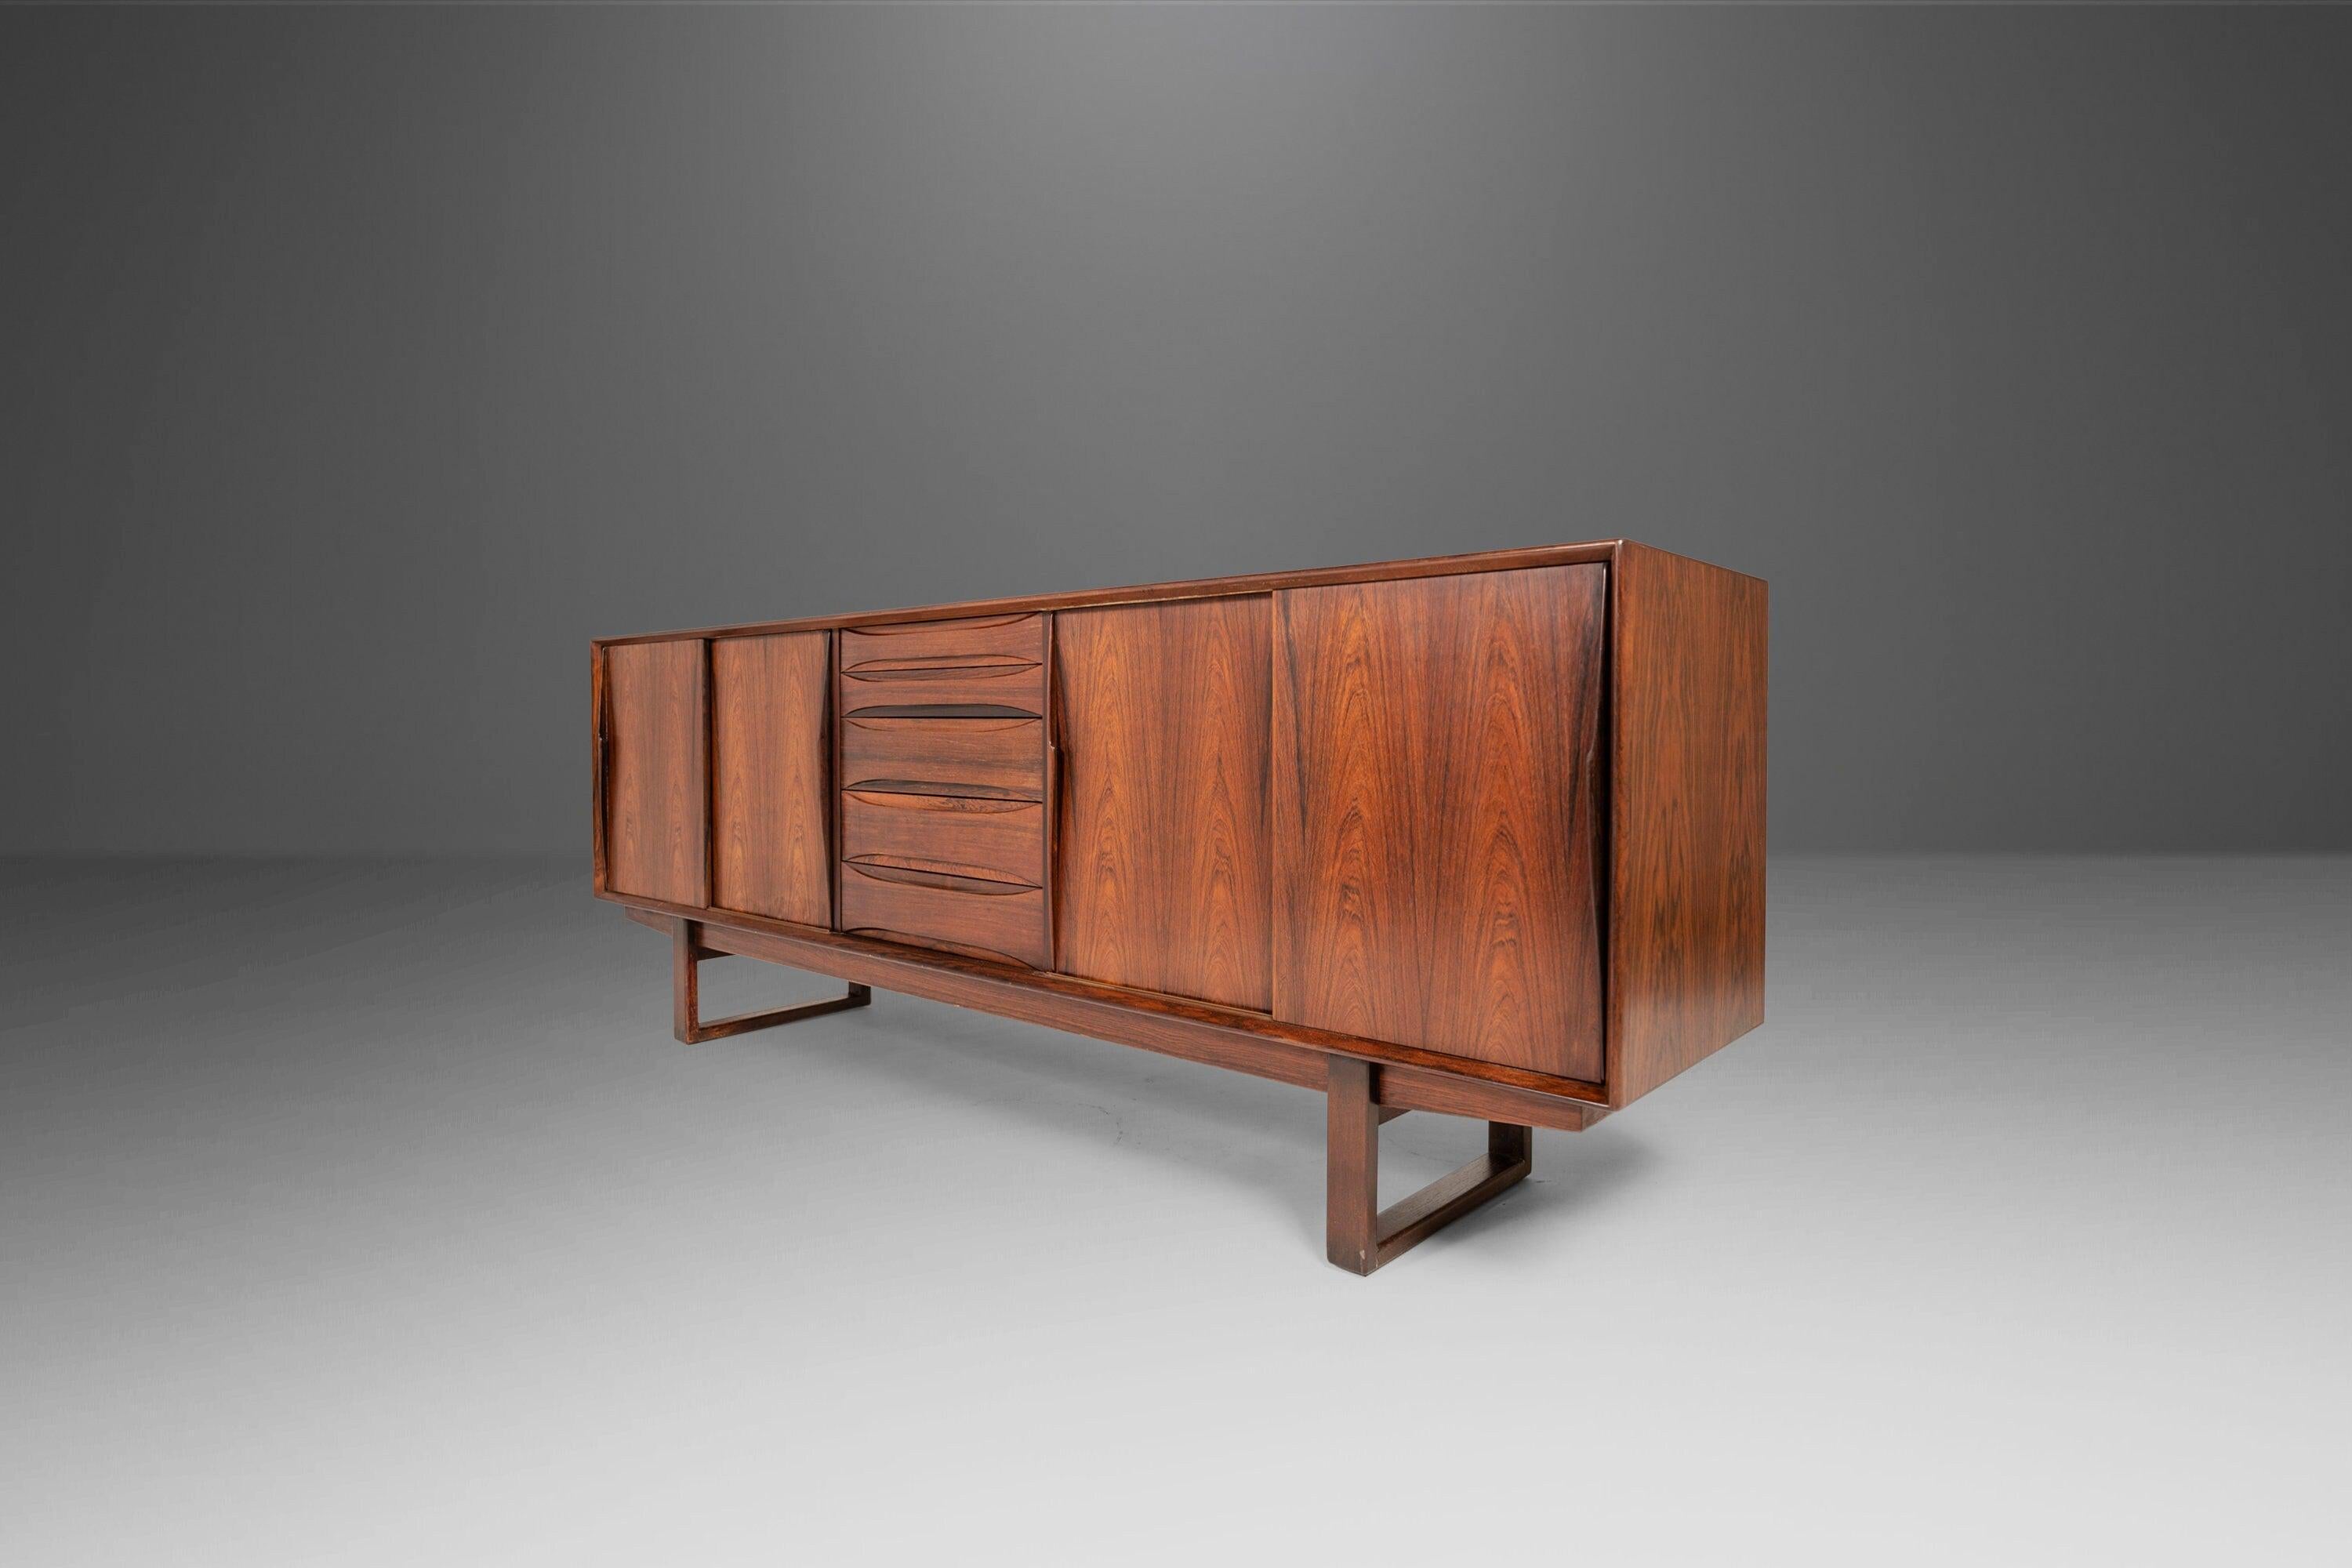 Equal parts beauty and functionality this exquisite credenza, attributed to Arne Vodder, is the epitome of 'functional art'. Constructed of a mix of solid and veneered Brazilian rosewood with exceptional variegated woodgrains unique to Brazilian